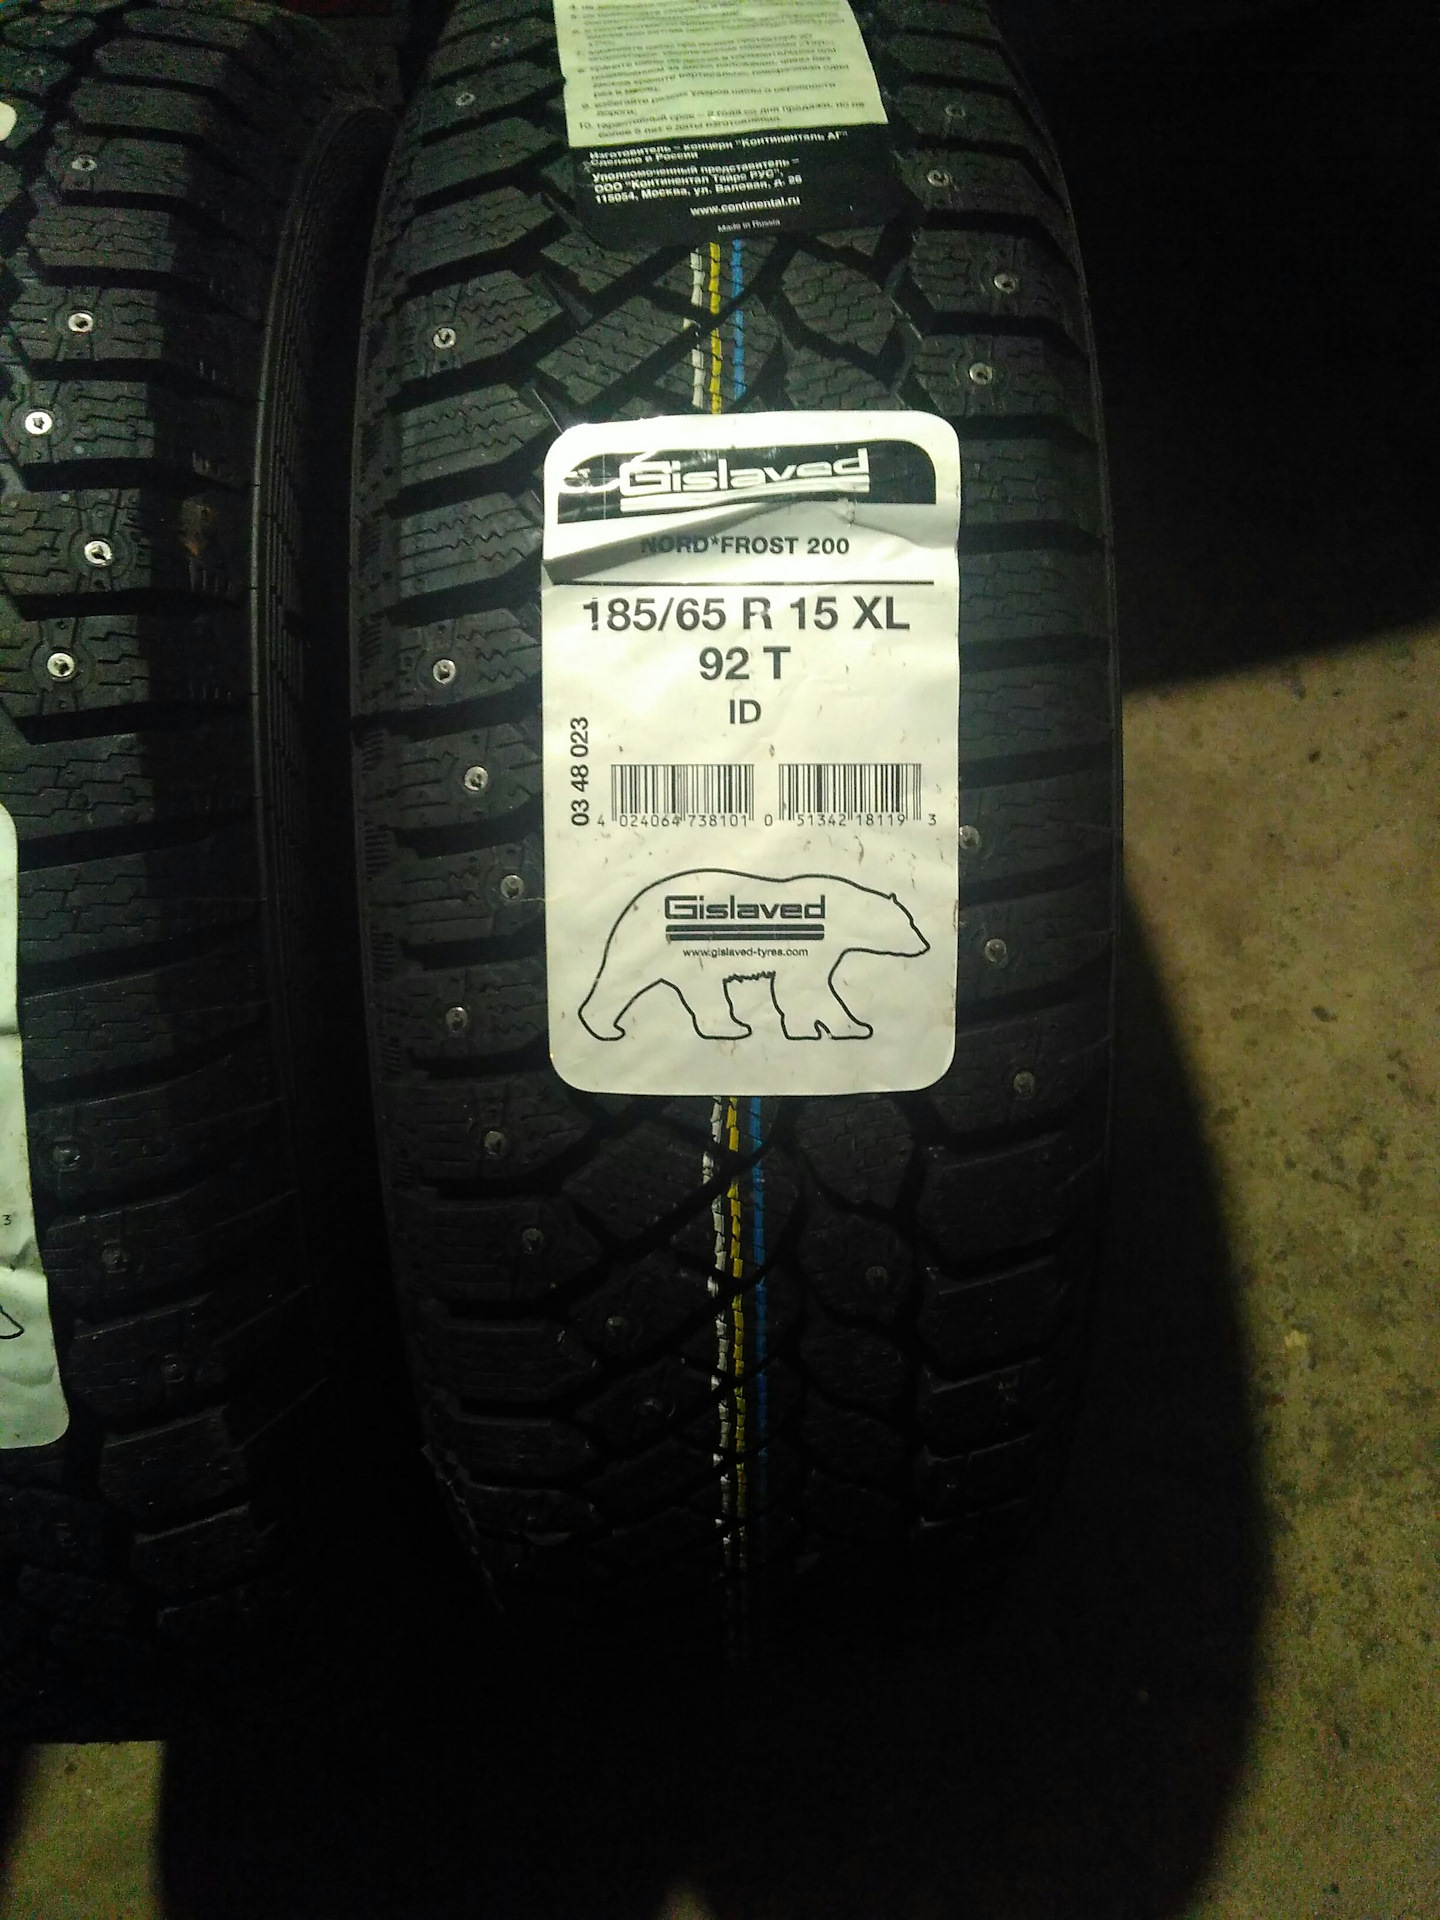 Gislaved frost 200 купить. Gislaved Nord Frost 200 185/65 r15. 185/60 Норд Фрост 200. Зимняя резина на 17 Nord Frost 200. Гиславед 185/65 r15.